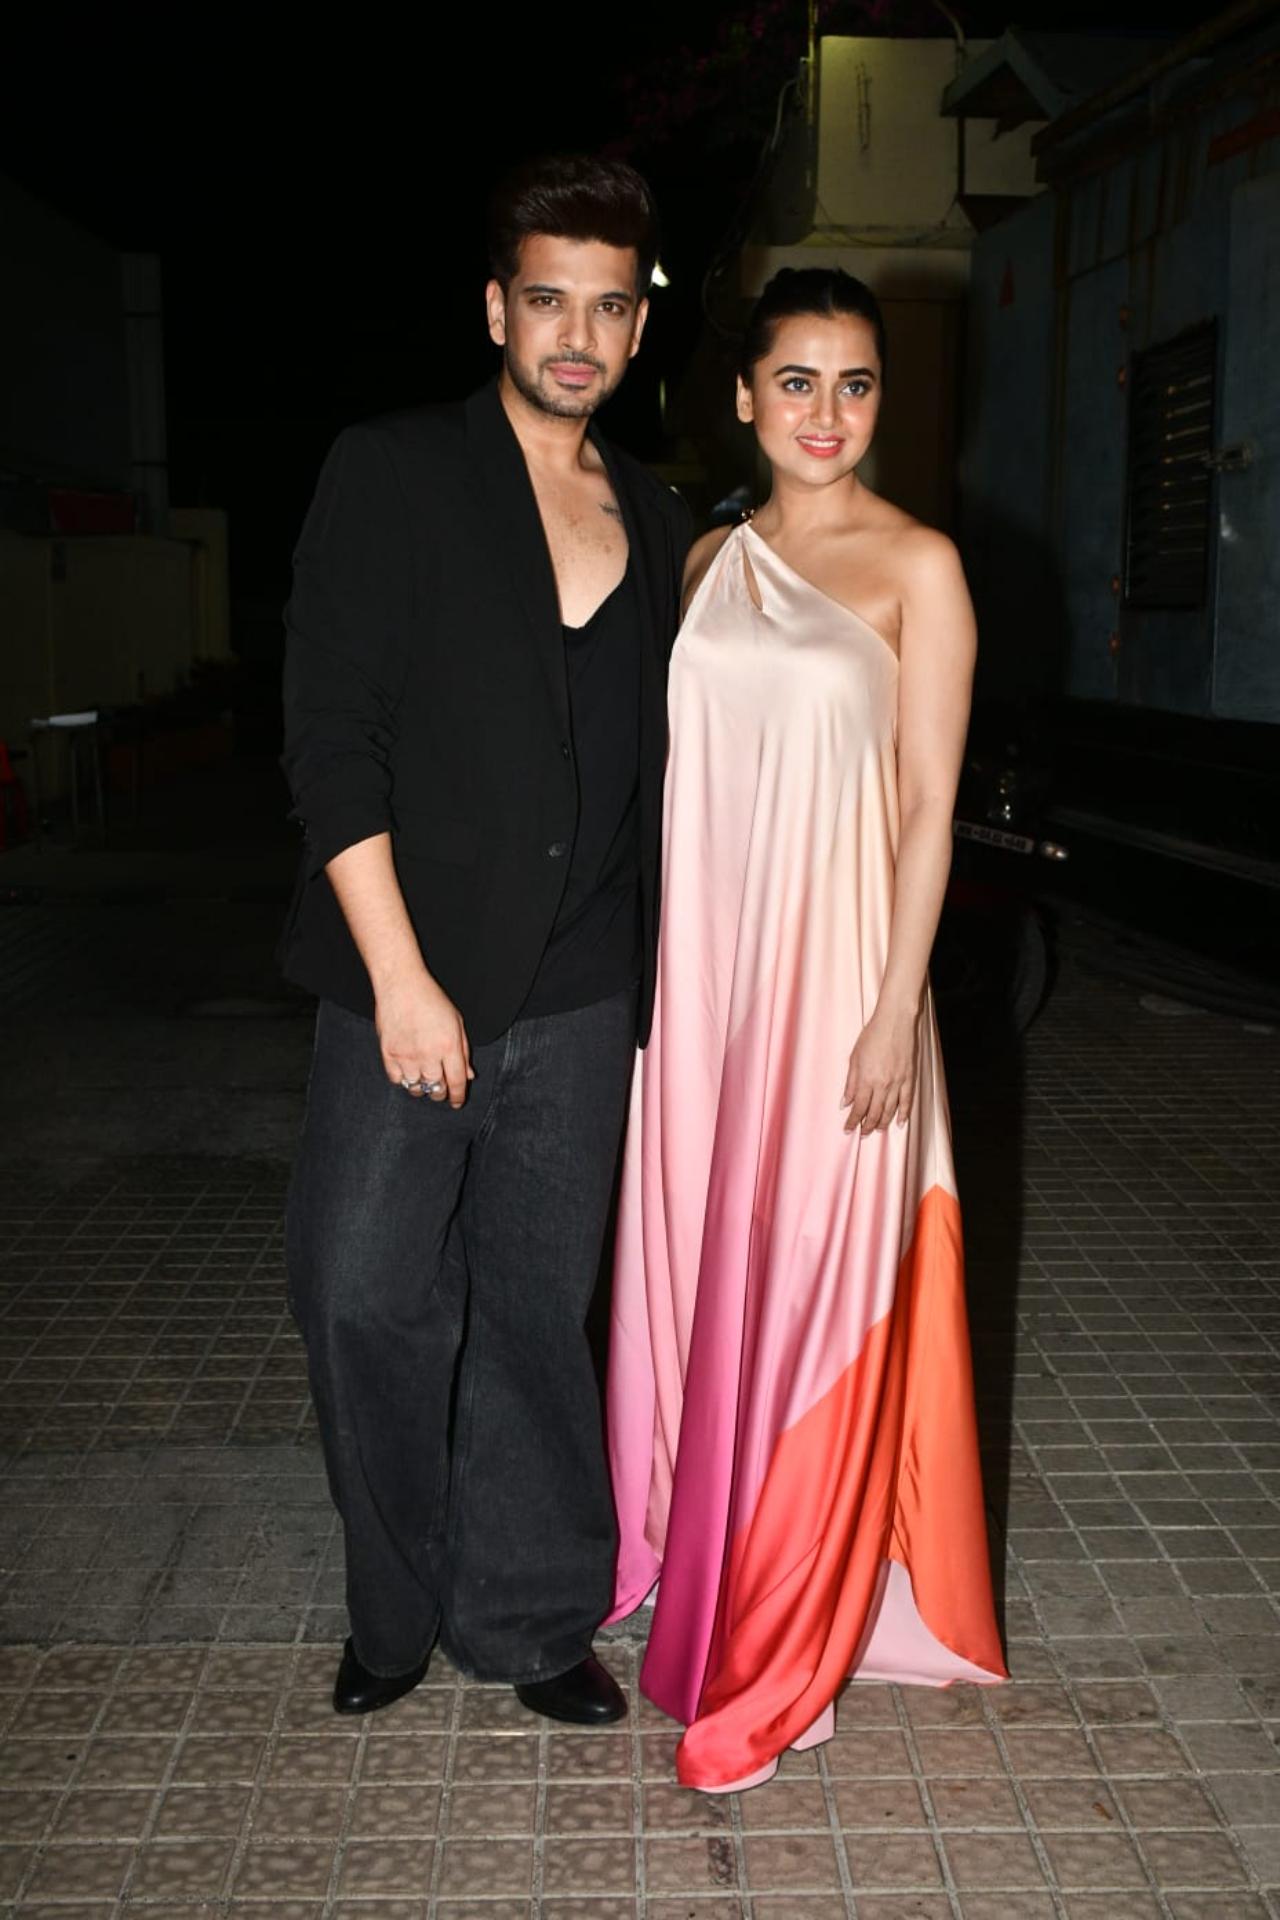 Karan and Tejasswi never fail to give couple goals. Karan was seen cheering and supporting for Tejasswi at the screening